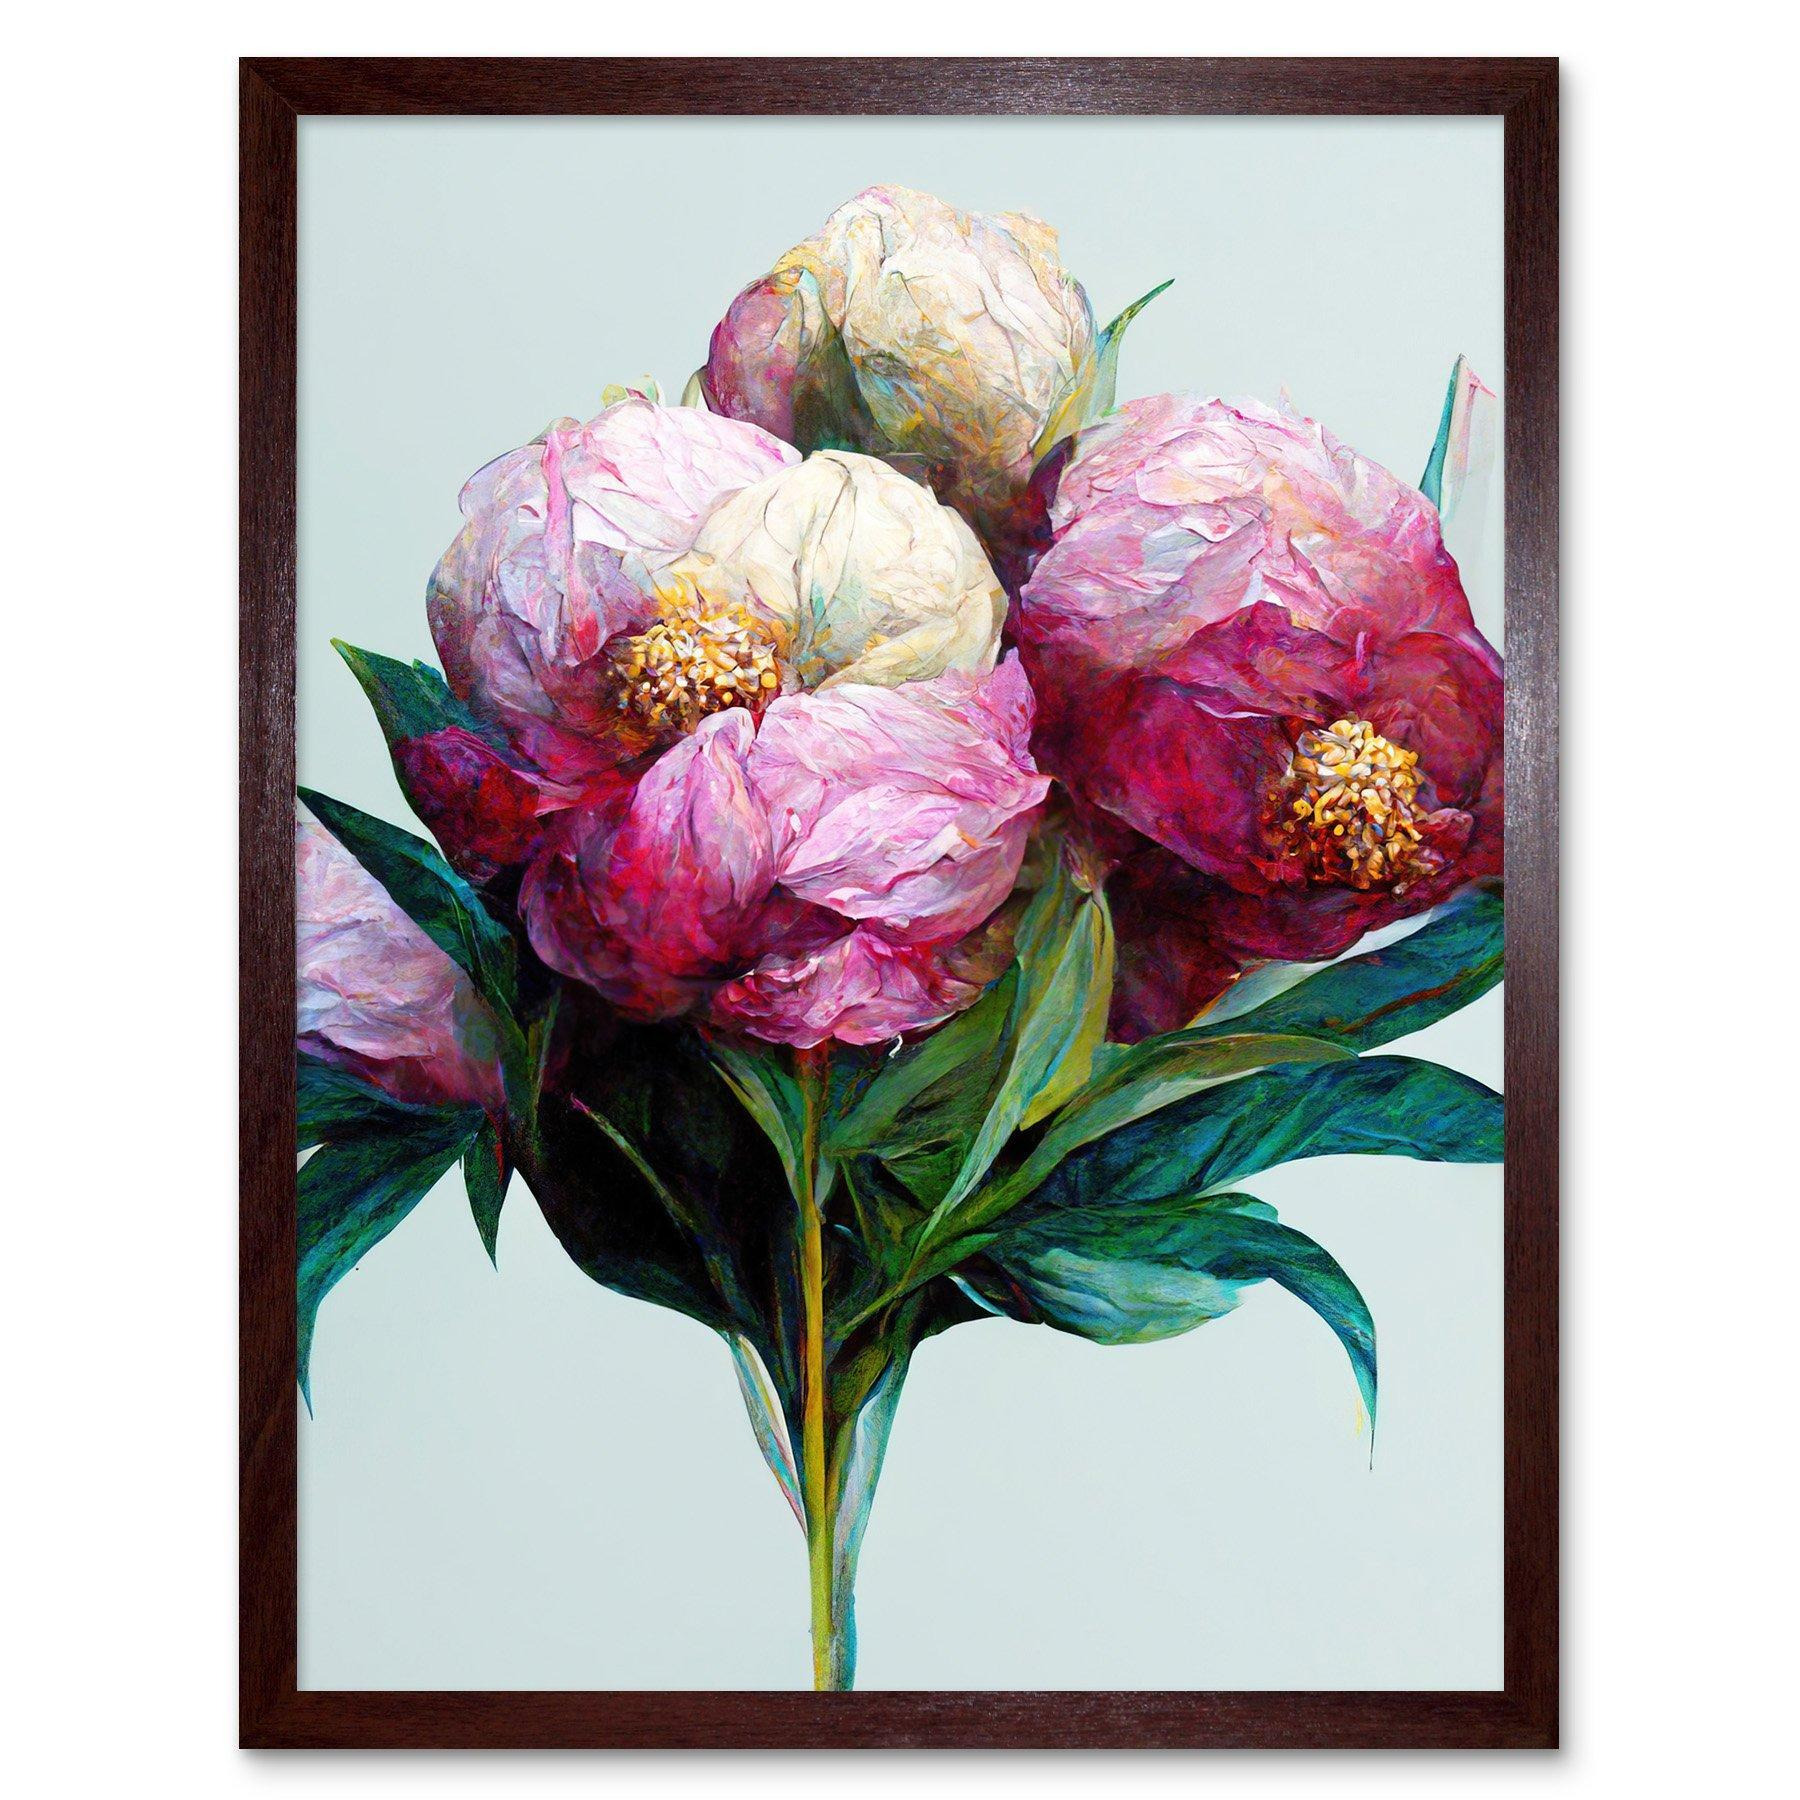 Modern Realistic Pink And White Peony Flowers Art Print Framed Poster Wall Decor 12x16 inch - image 1